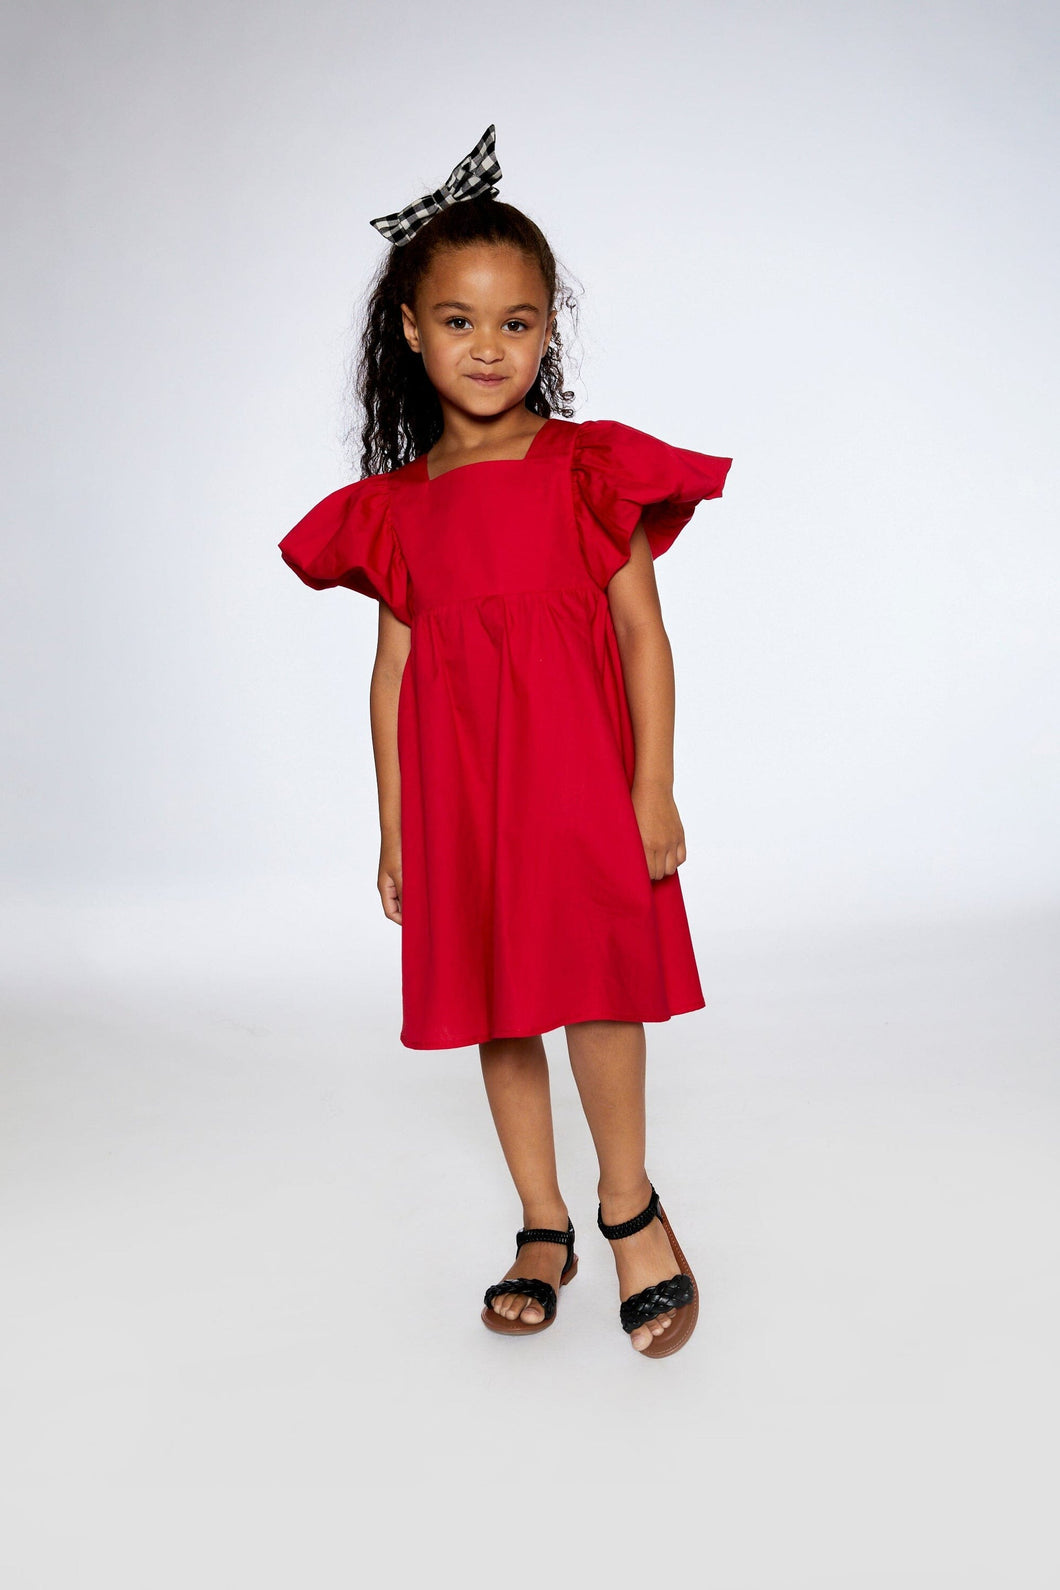 DPD24 Red Dress with Bubble Sleeves